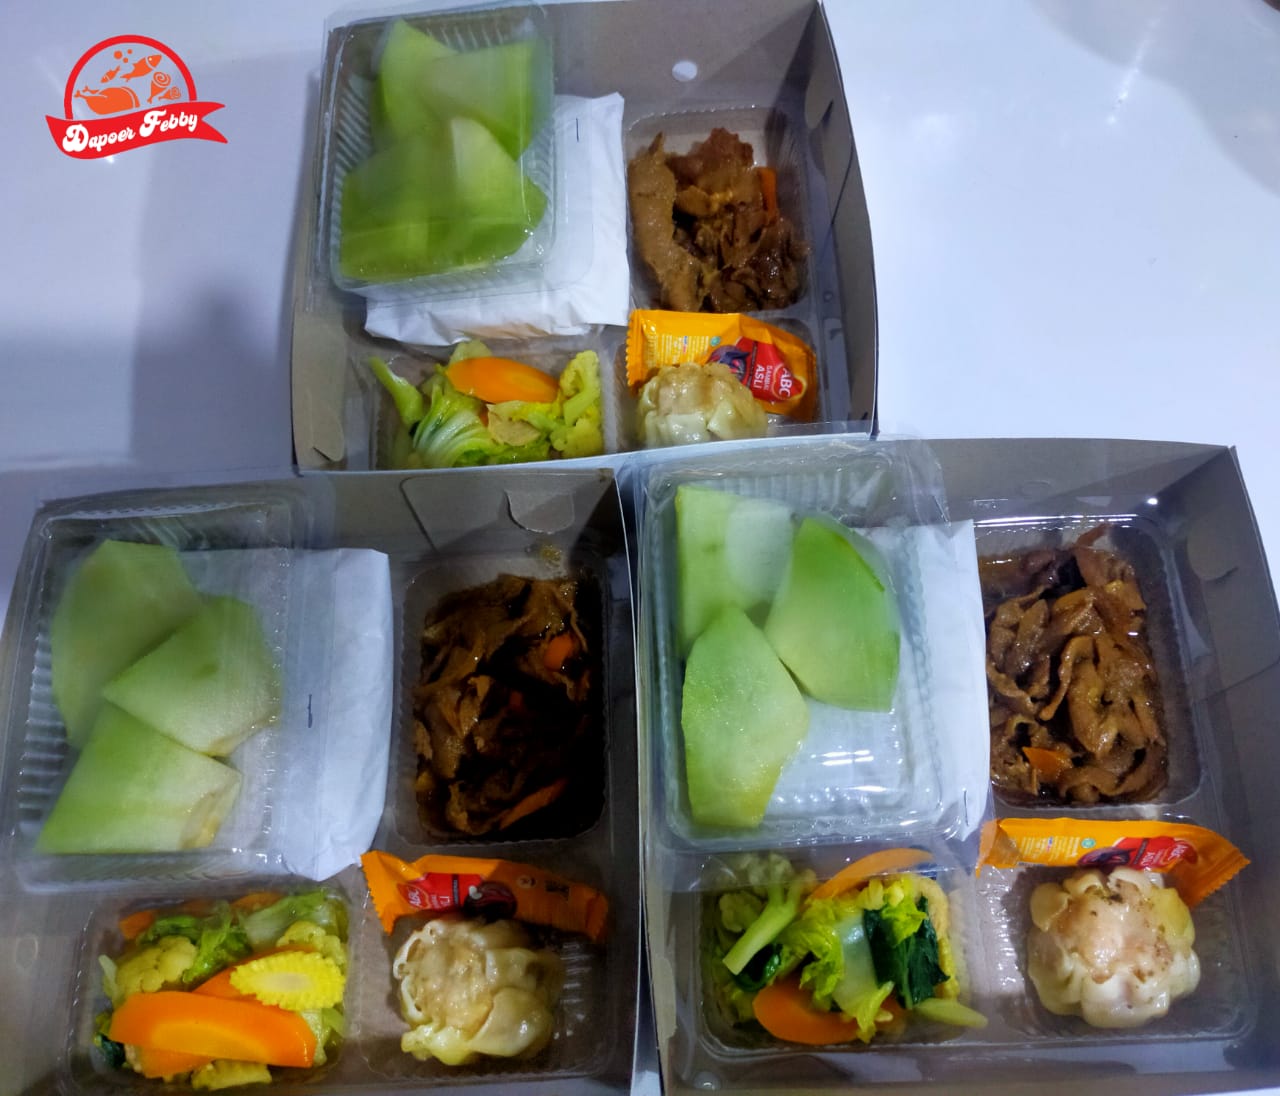 CATERING DAPUR FEBY